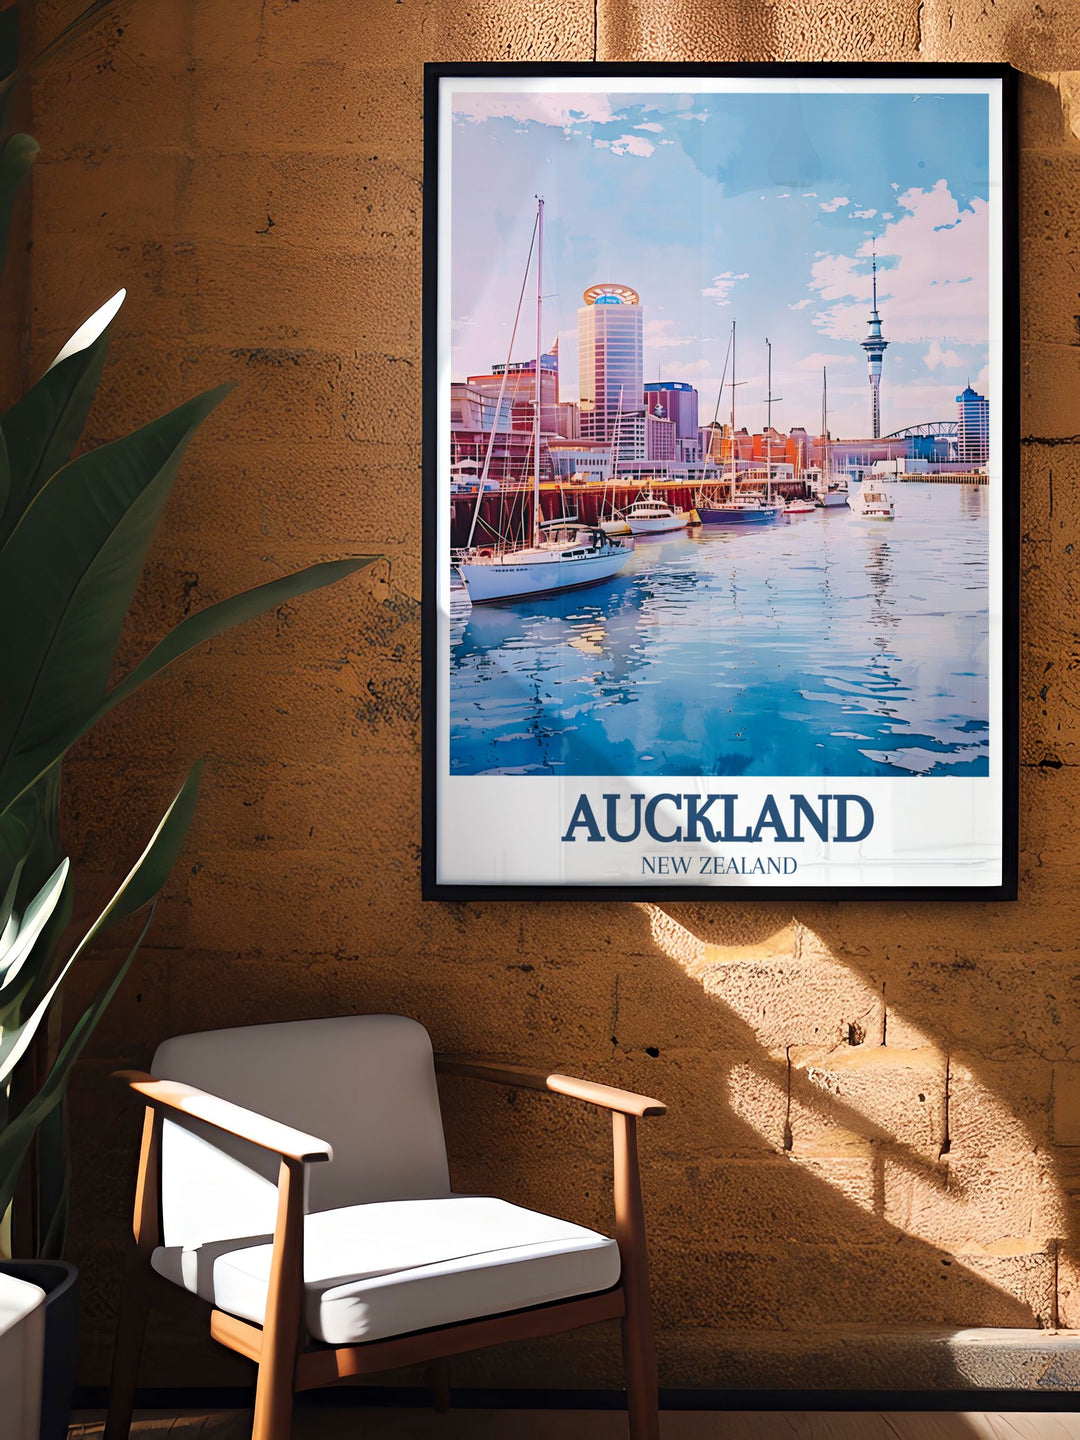 Unique New Zealand artwork of Aucklands waterfront, featuring landmarks like the Viaduct Harbour, Wynyard Quarter, and Harbour Bridge. Ideal for personalized gifts or home decor, this print captures the citys essence and vibrant charm.